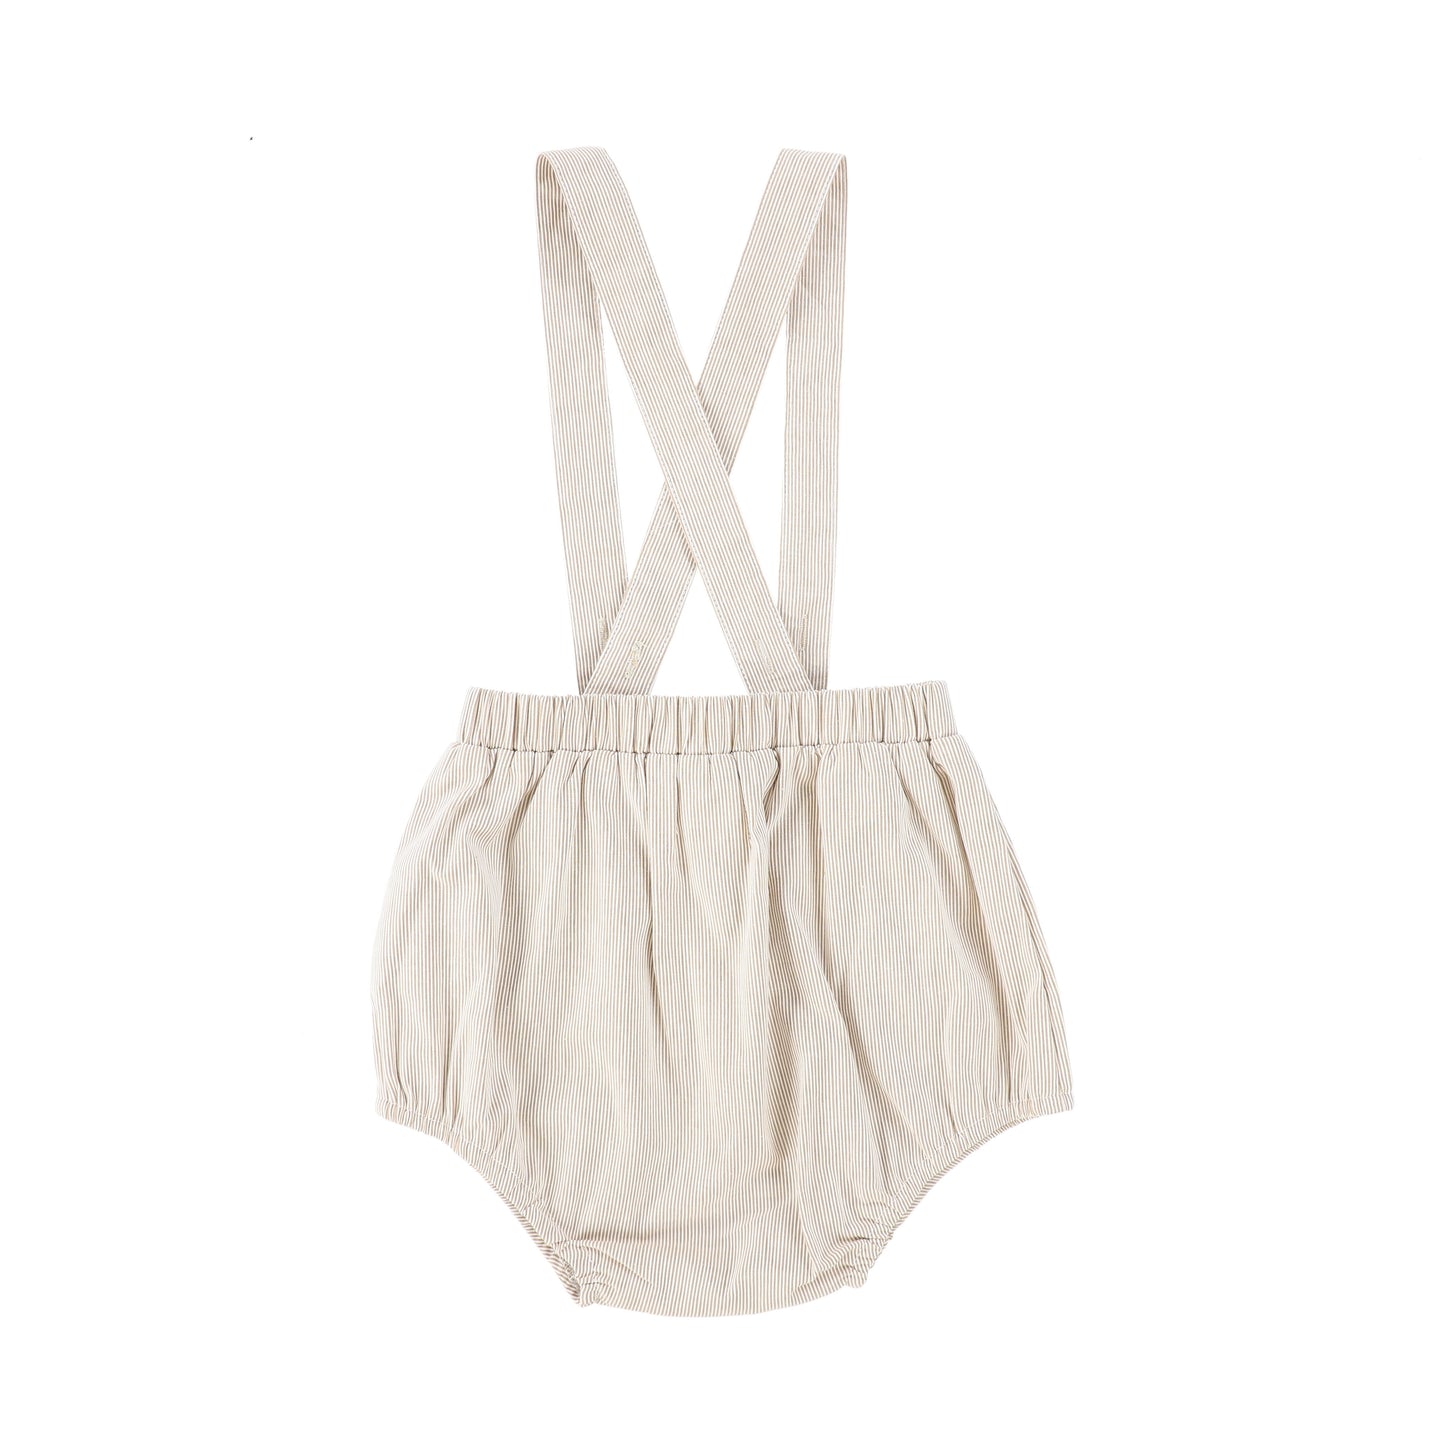 BACE COLLECTION TAN THIN STRIPED BLOOMER [FINAL SALE]